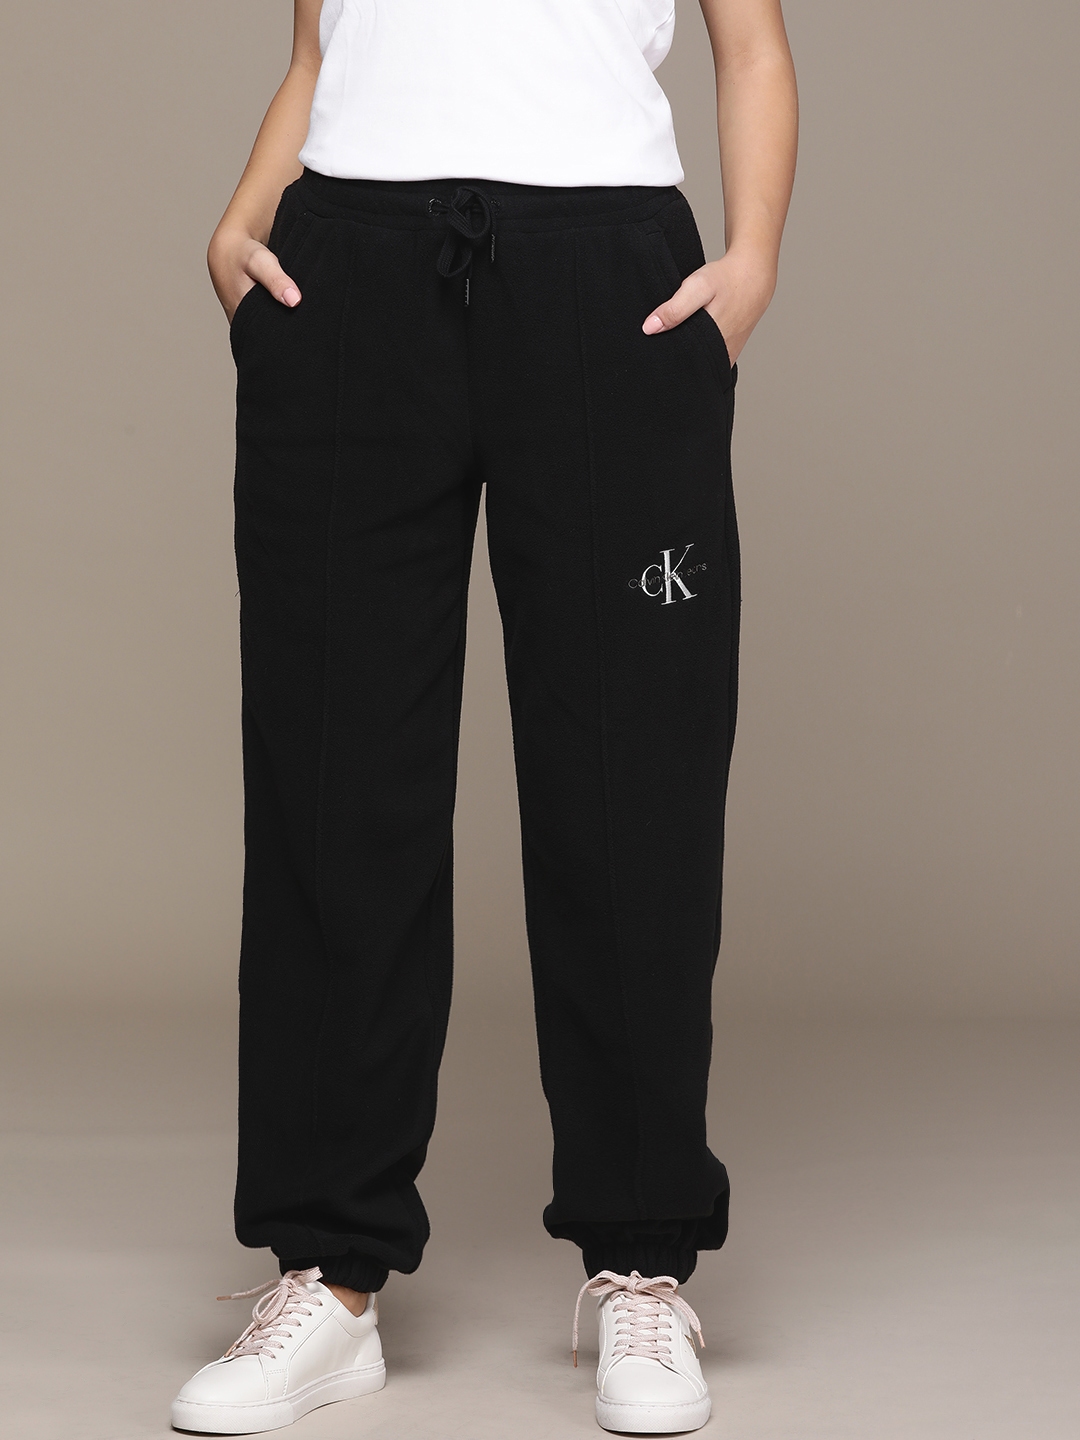 Calvin Klein Jeans Track Pants - Buy Calvin Klein Jeans Track Pants online  in India